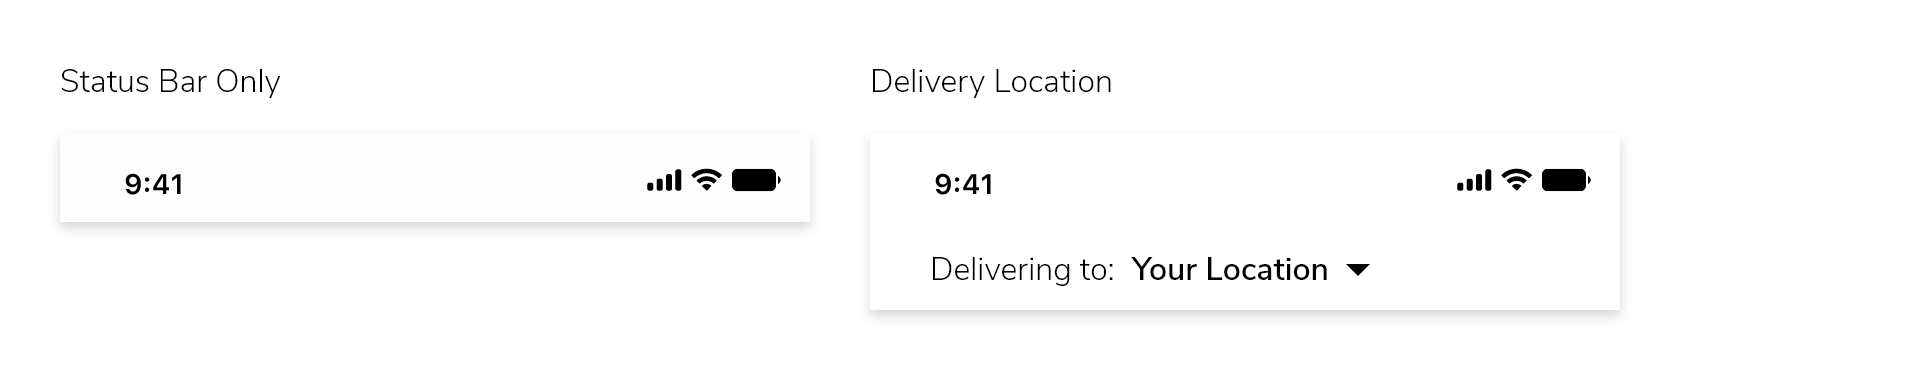 The Top Navigation Element showing the status bar alone, and the delivery address